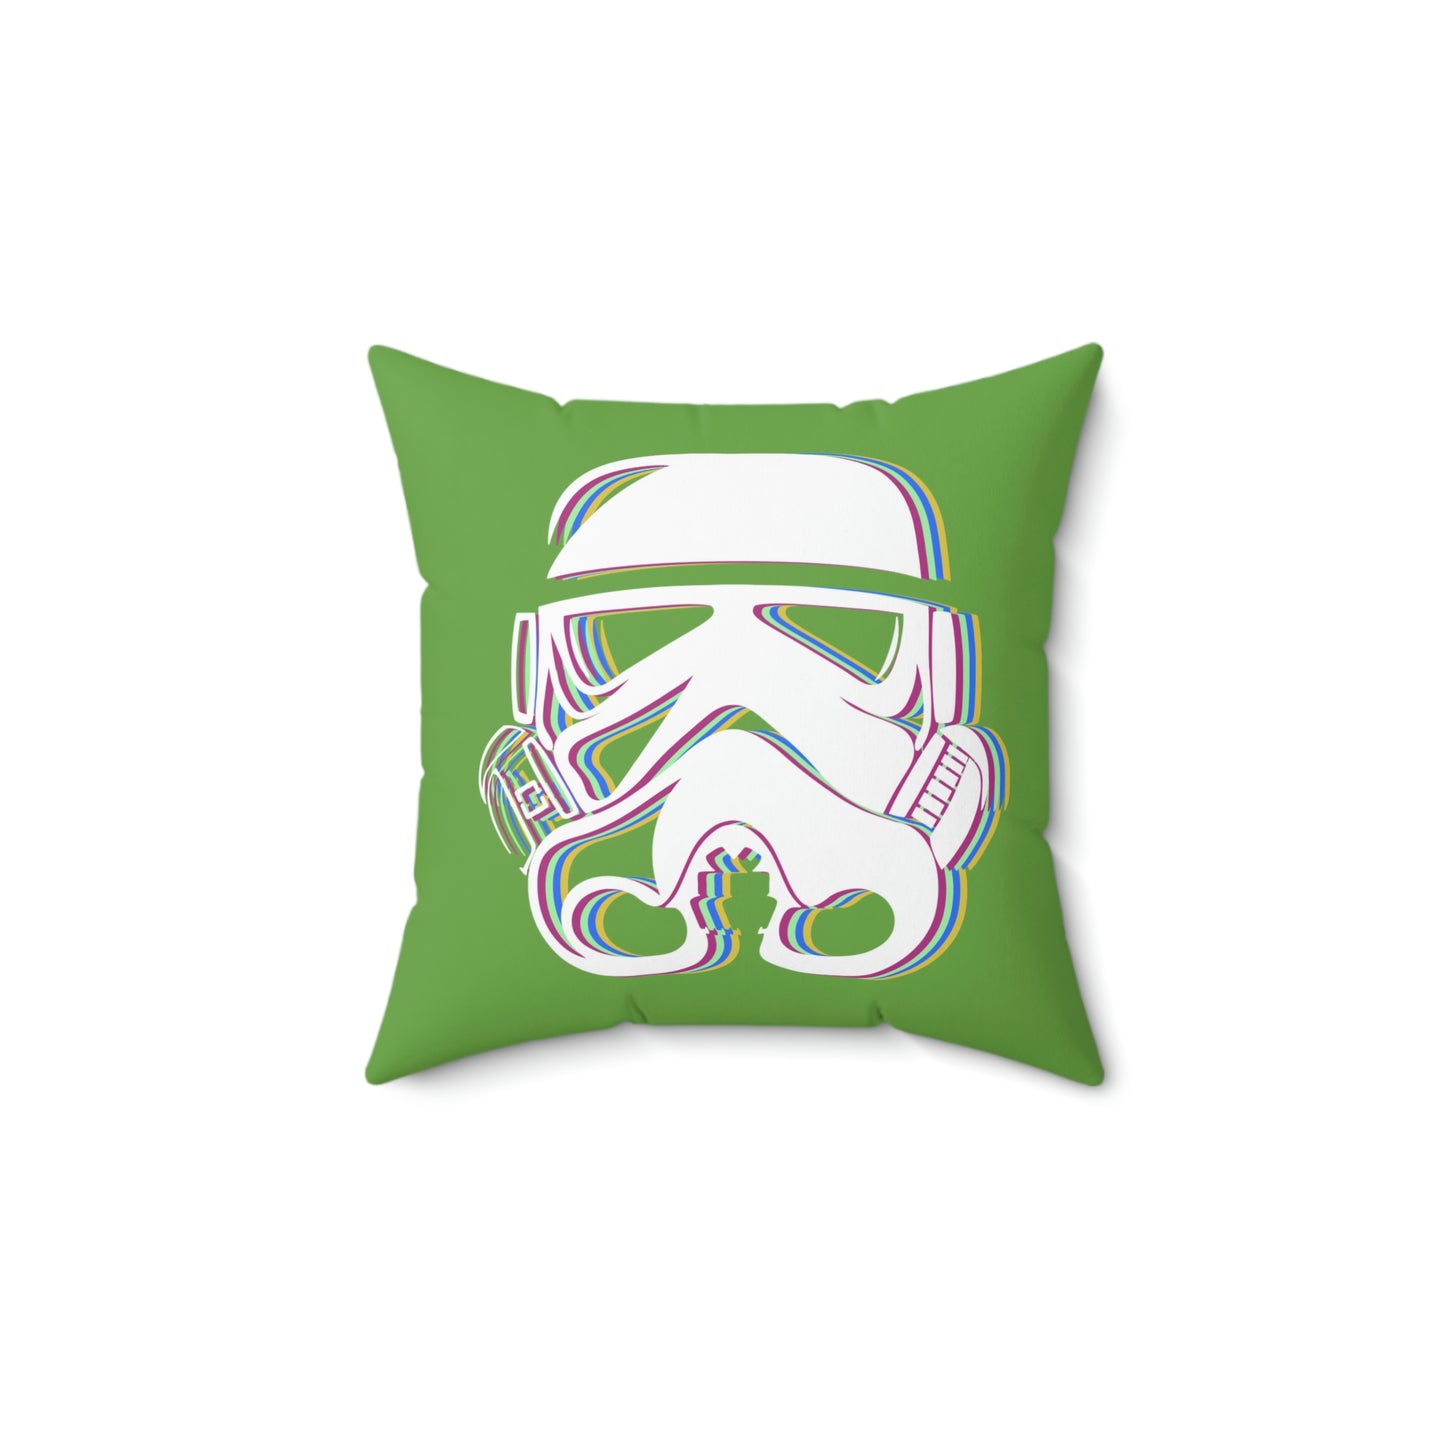 Spun Polyester Square Pillow Case ”Storm Trooper 16 on Green”